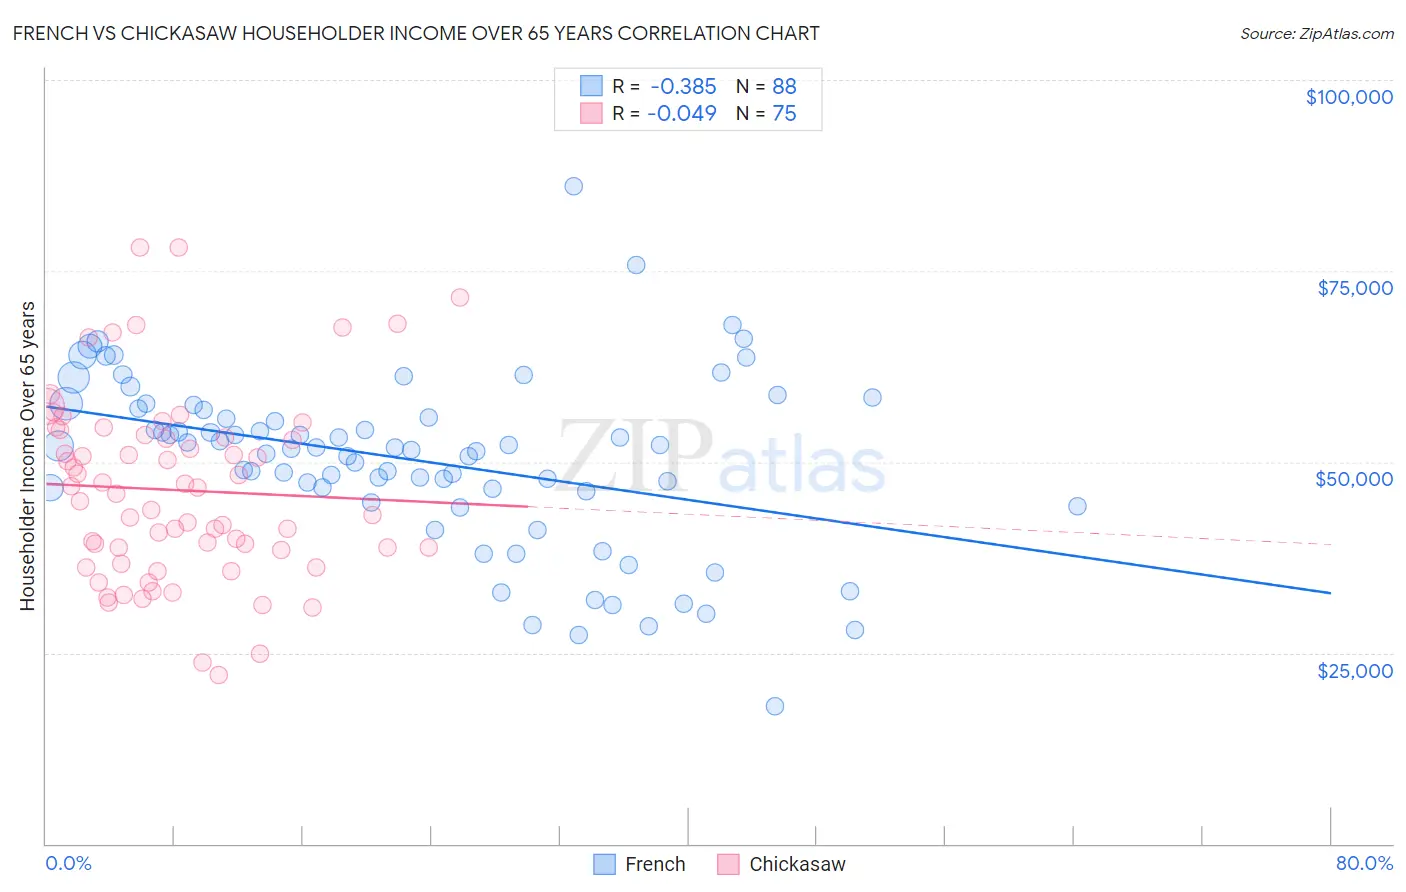 French vs Chickasaw Householder Income Over 65 years